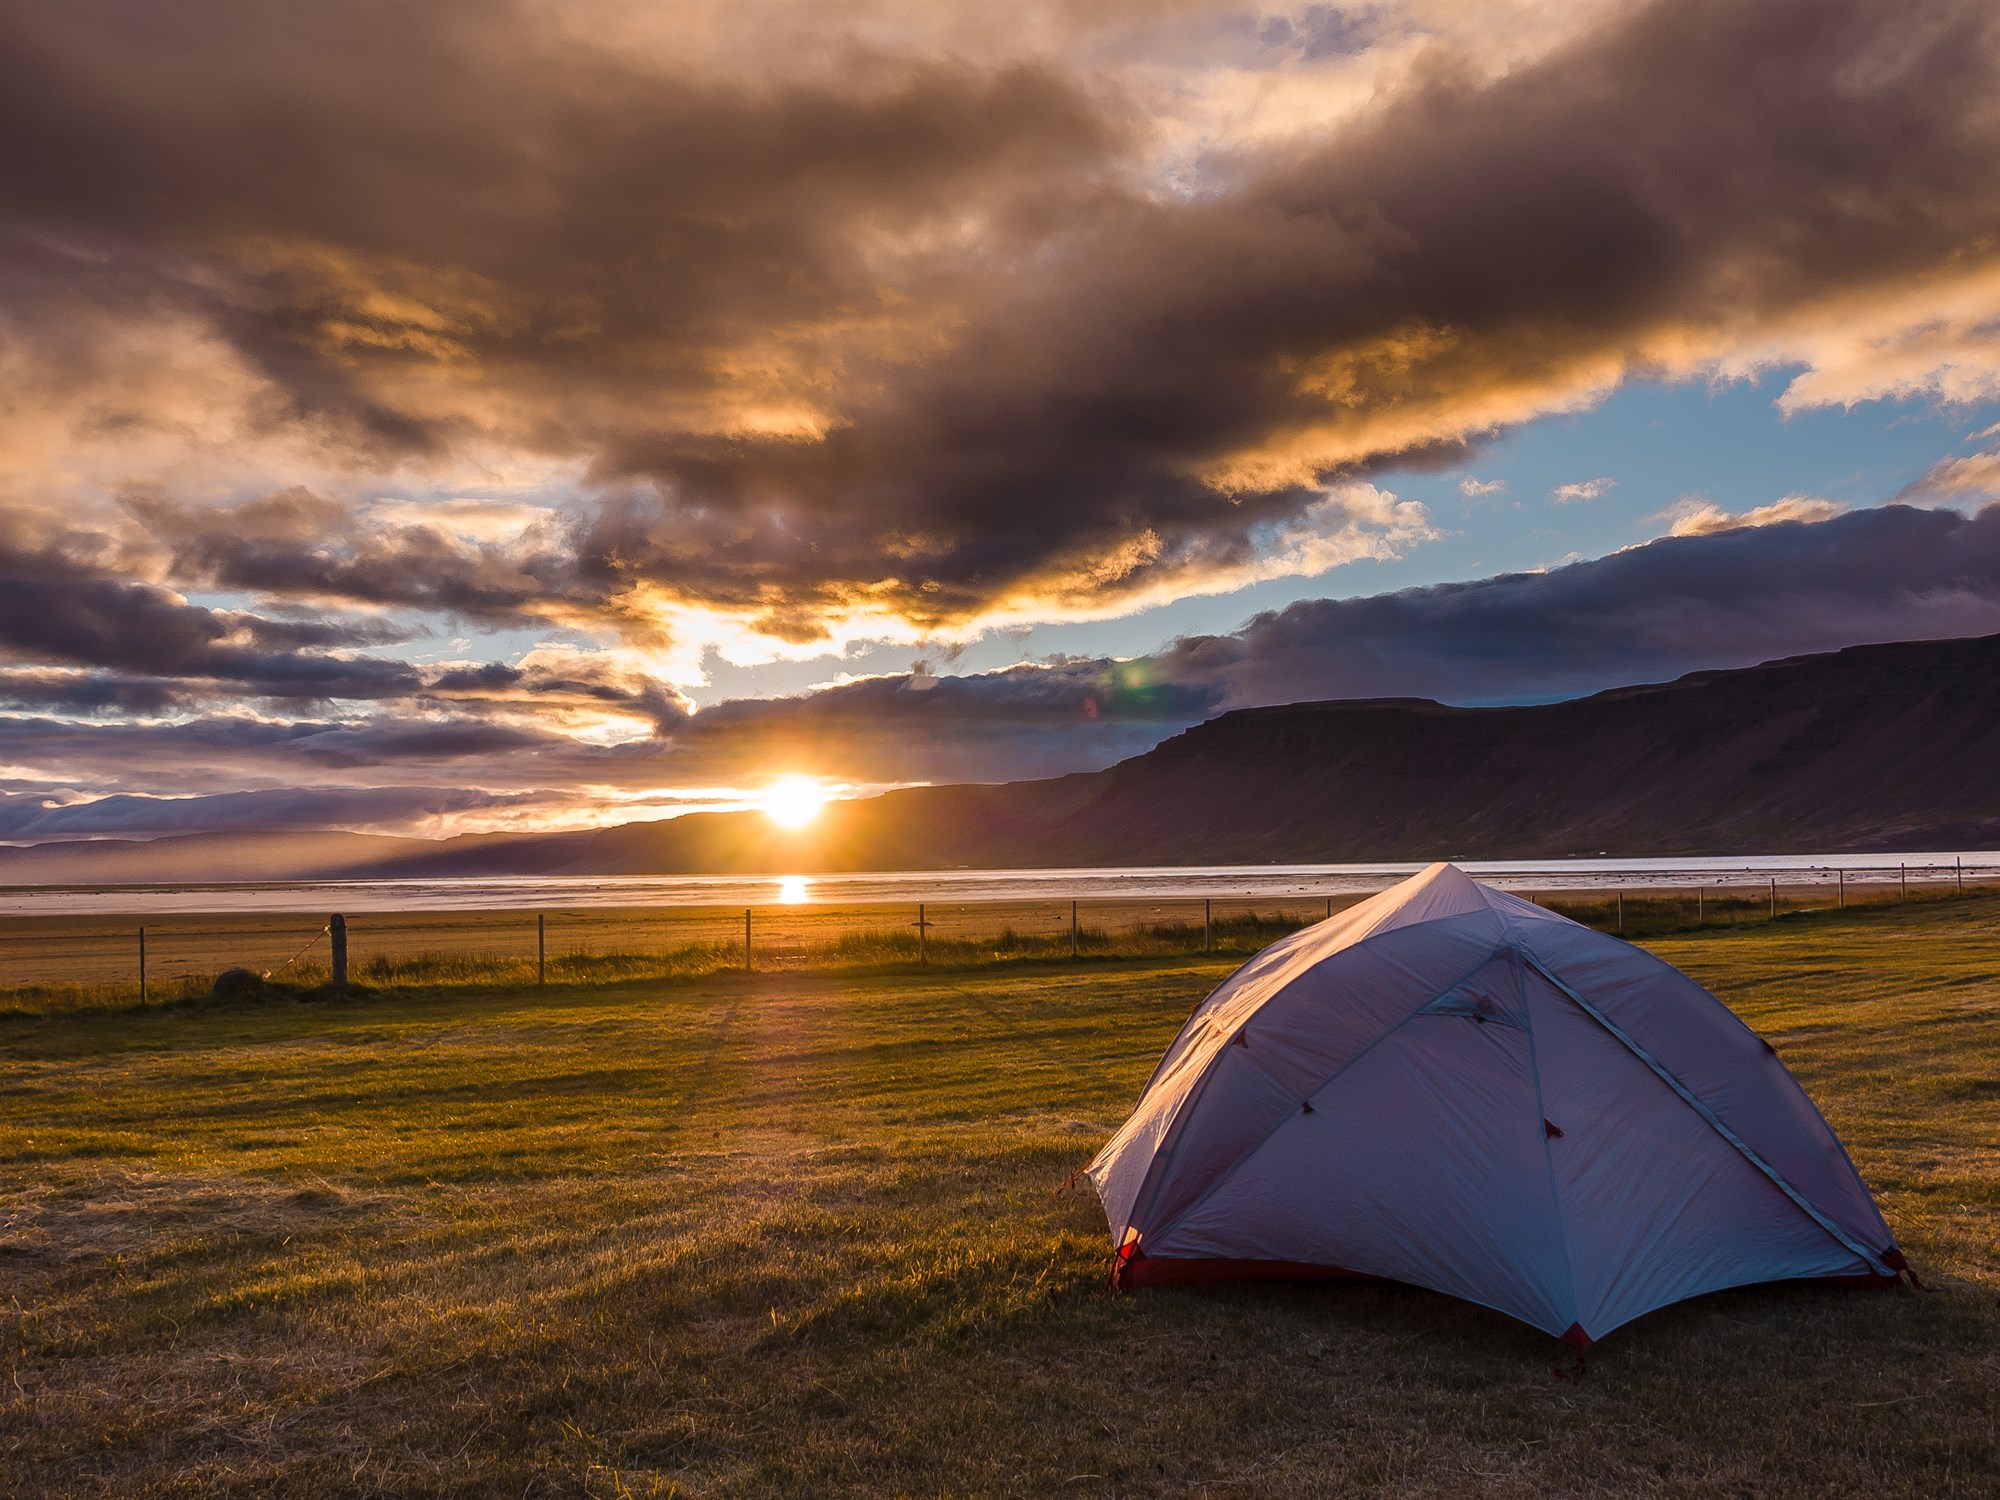 Tent pitched in Icelandic field as the sun rises over the rocky horizon.